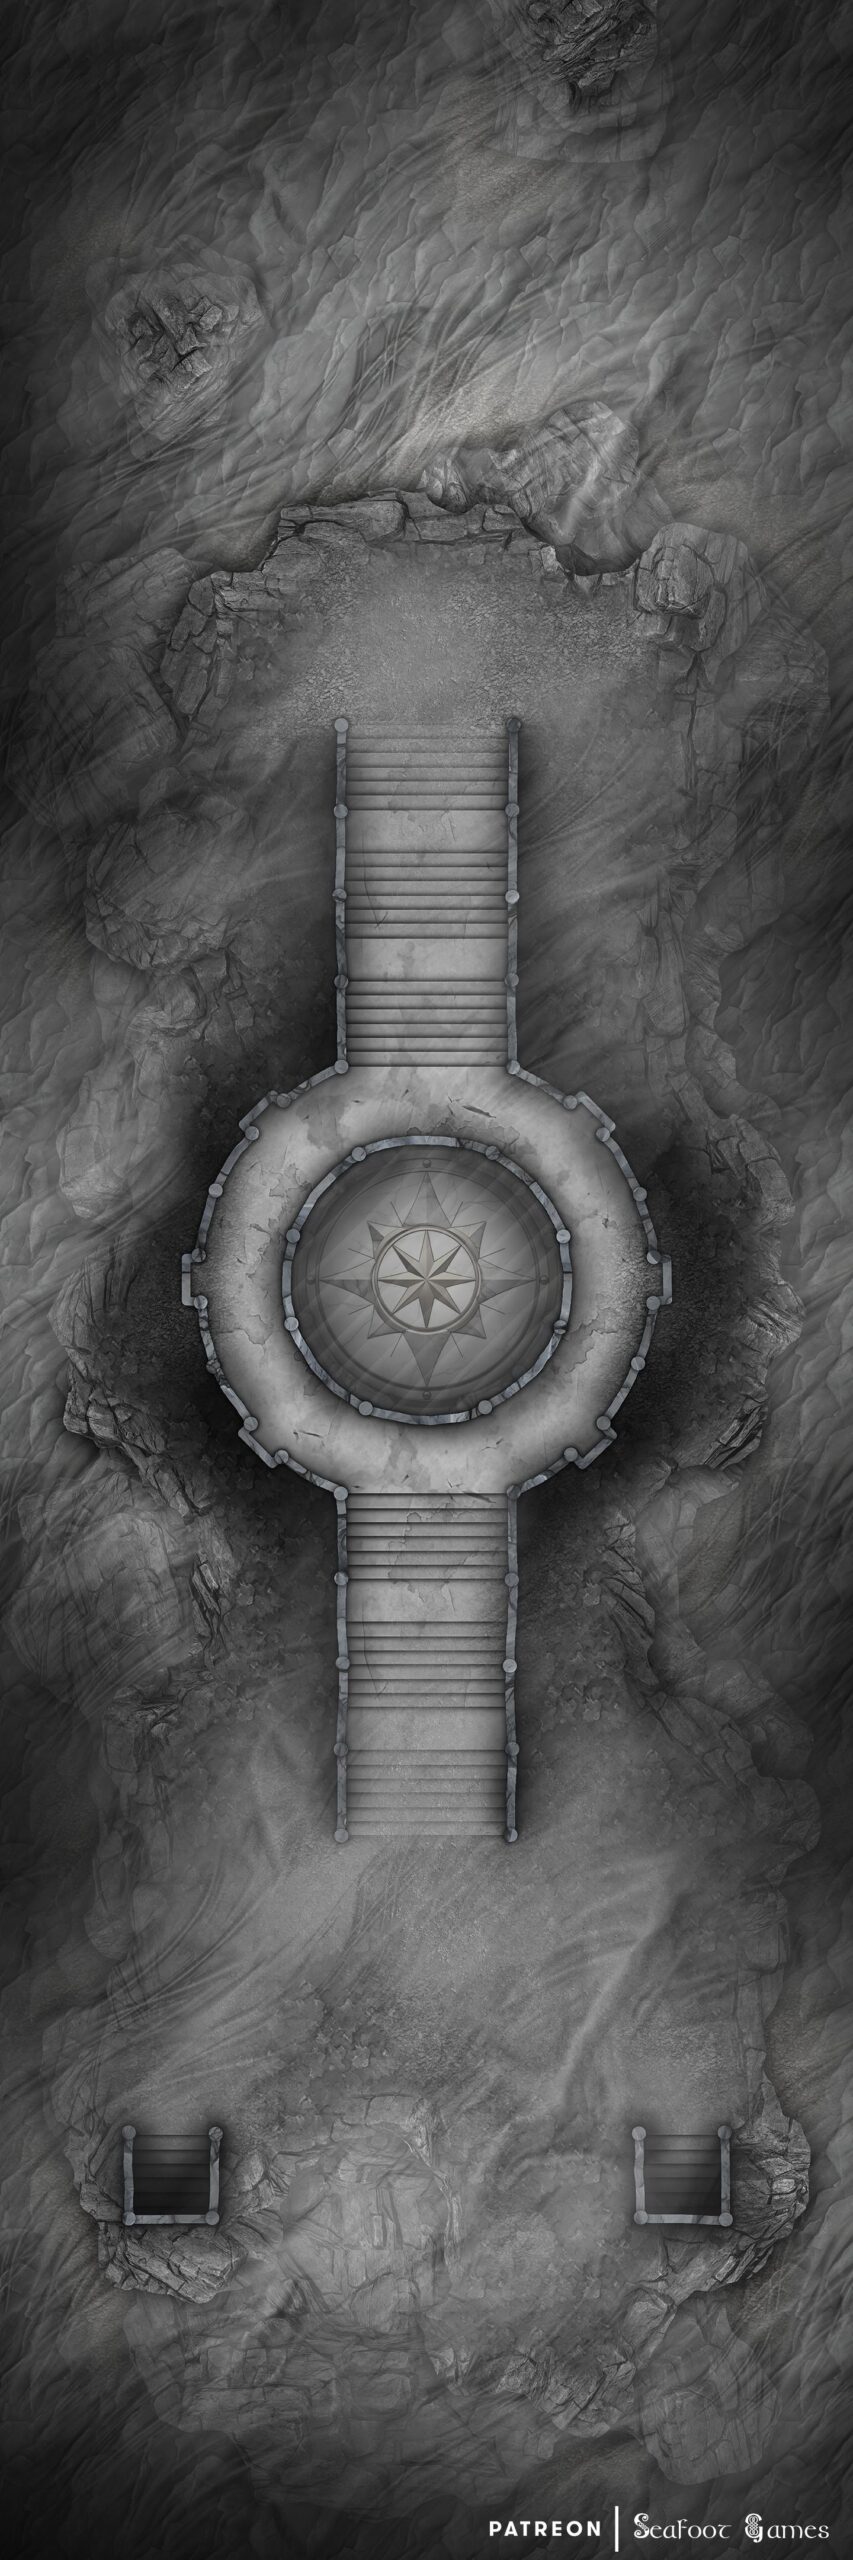 Level 1 of our Shadowrealm Archive Free 60x20 Multi-Level Battlemap & Adventure, featuring a journey to the shadowrealm to save knowledge. VTT ready!